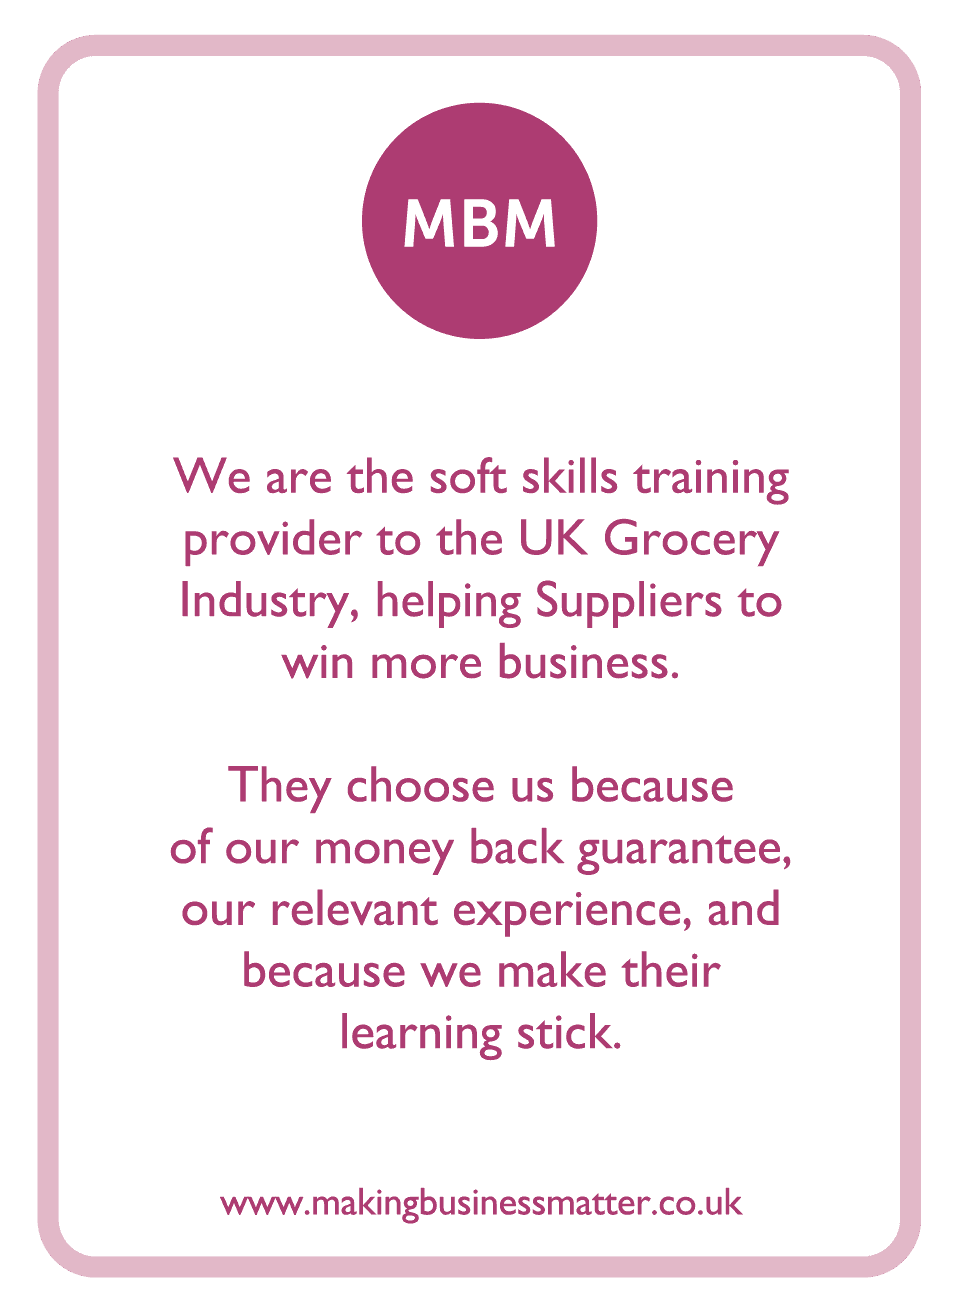 Coaching card with MBM logo and brand information